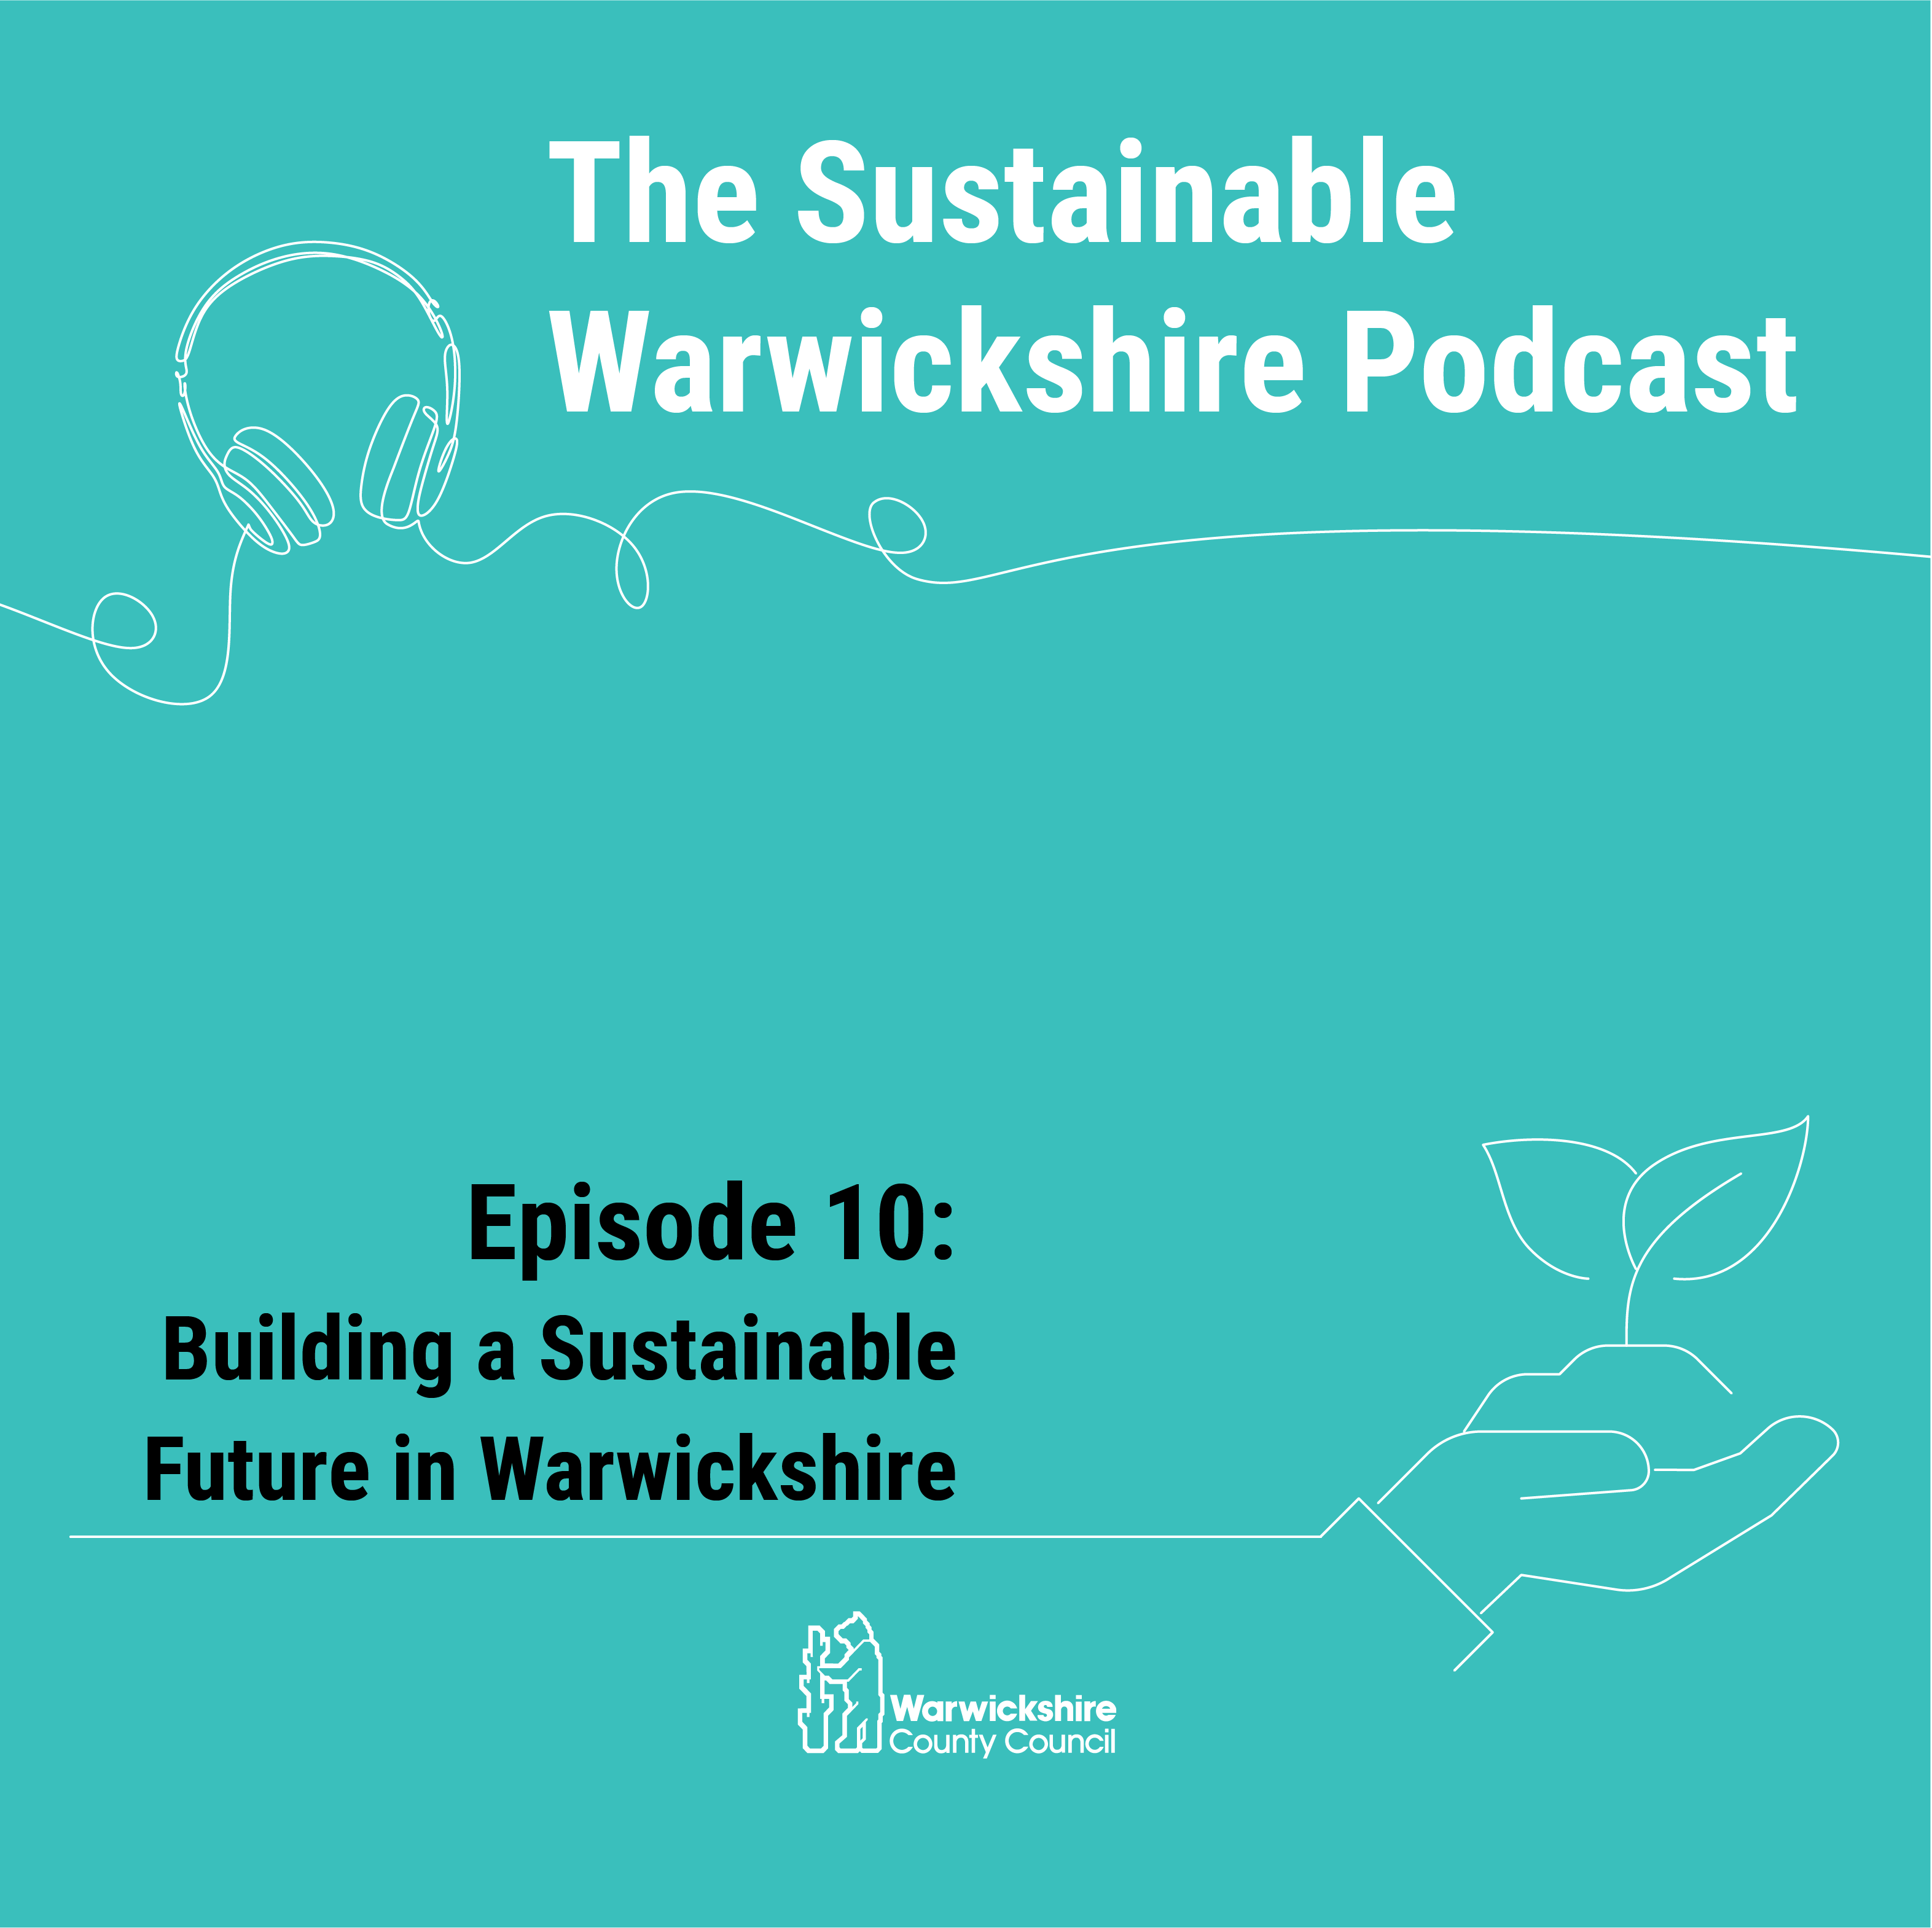 Building a sustainable future for Warwickshire – Warwickshire